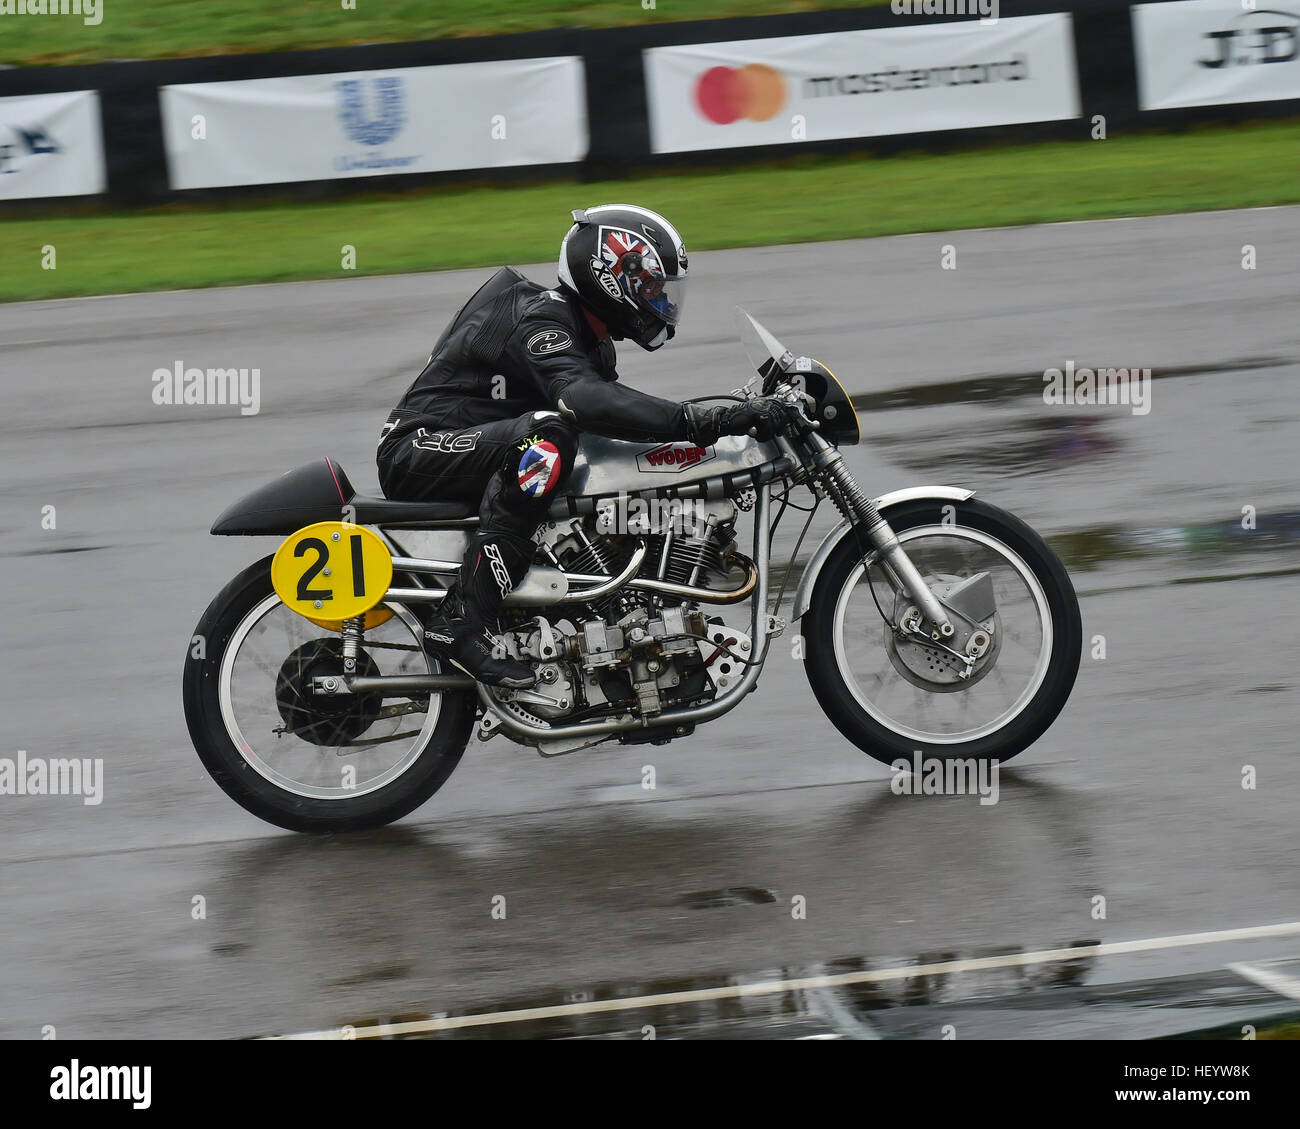 Clive Ling, Andy Reynolds, Woden-Jap, Barry Sheene Memorial Trophy, Goodwood Revival 2016, 2016, classic, bikes, motorcycles, Goodwood, Goodwood Reviv Stock Photo